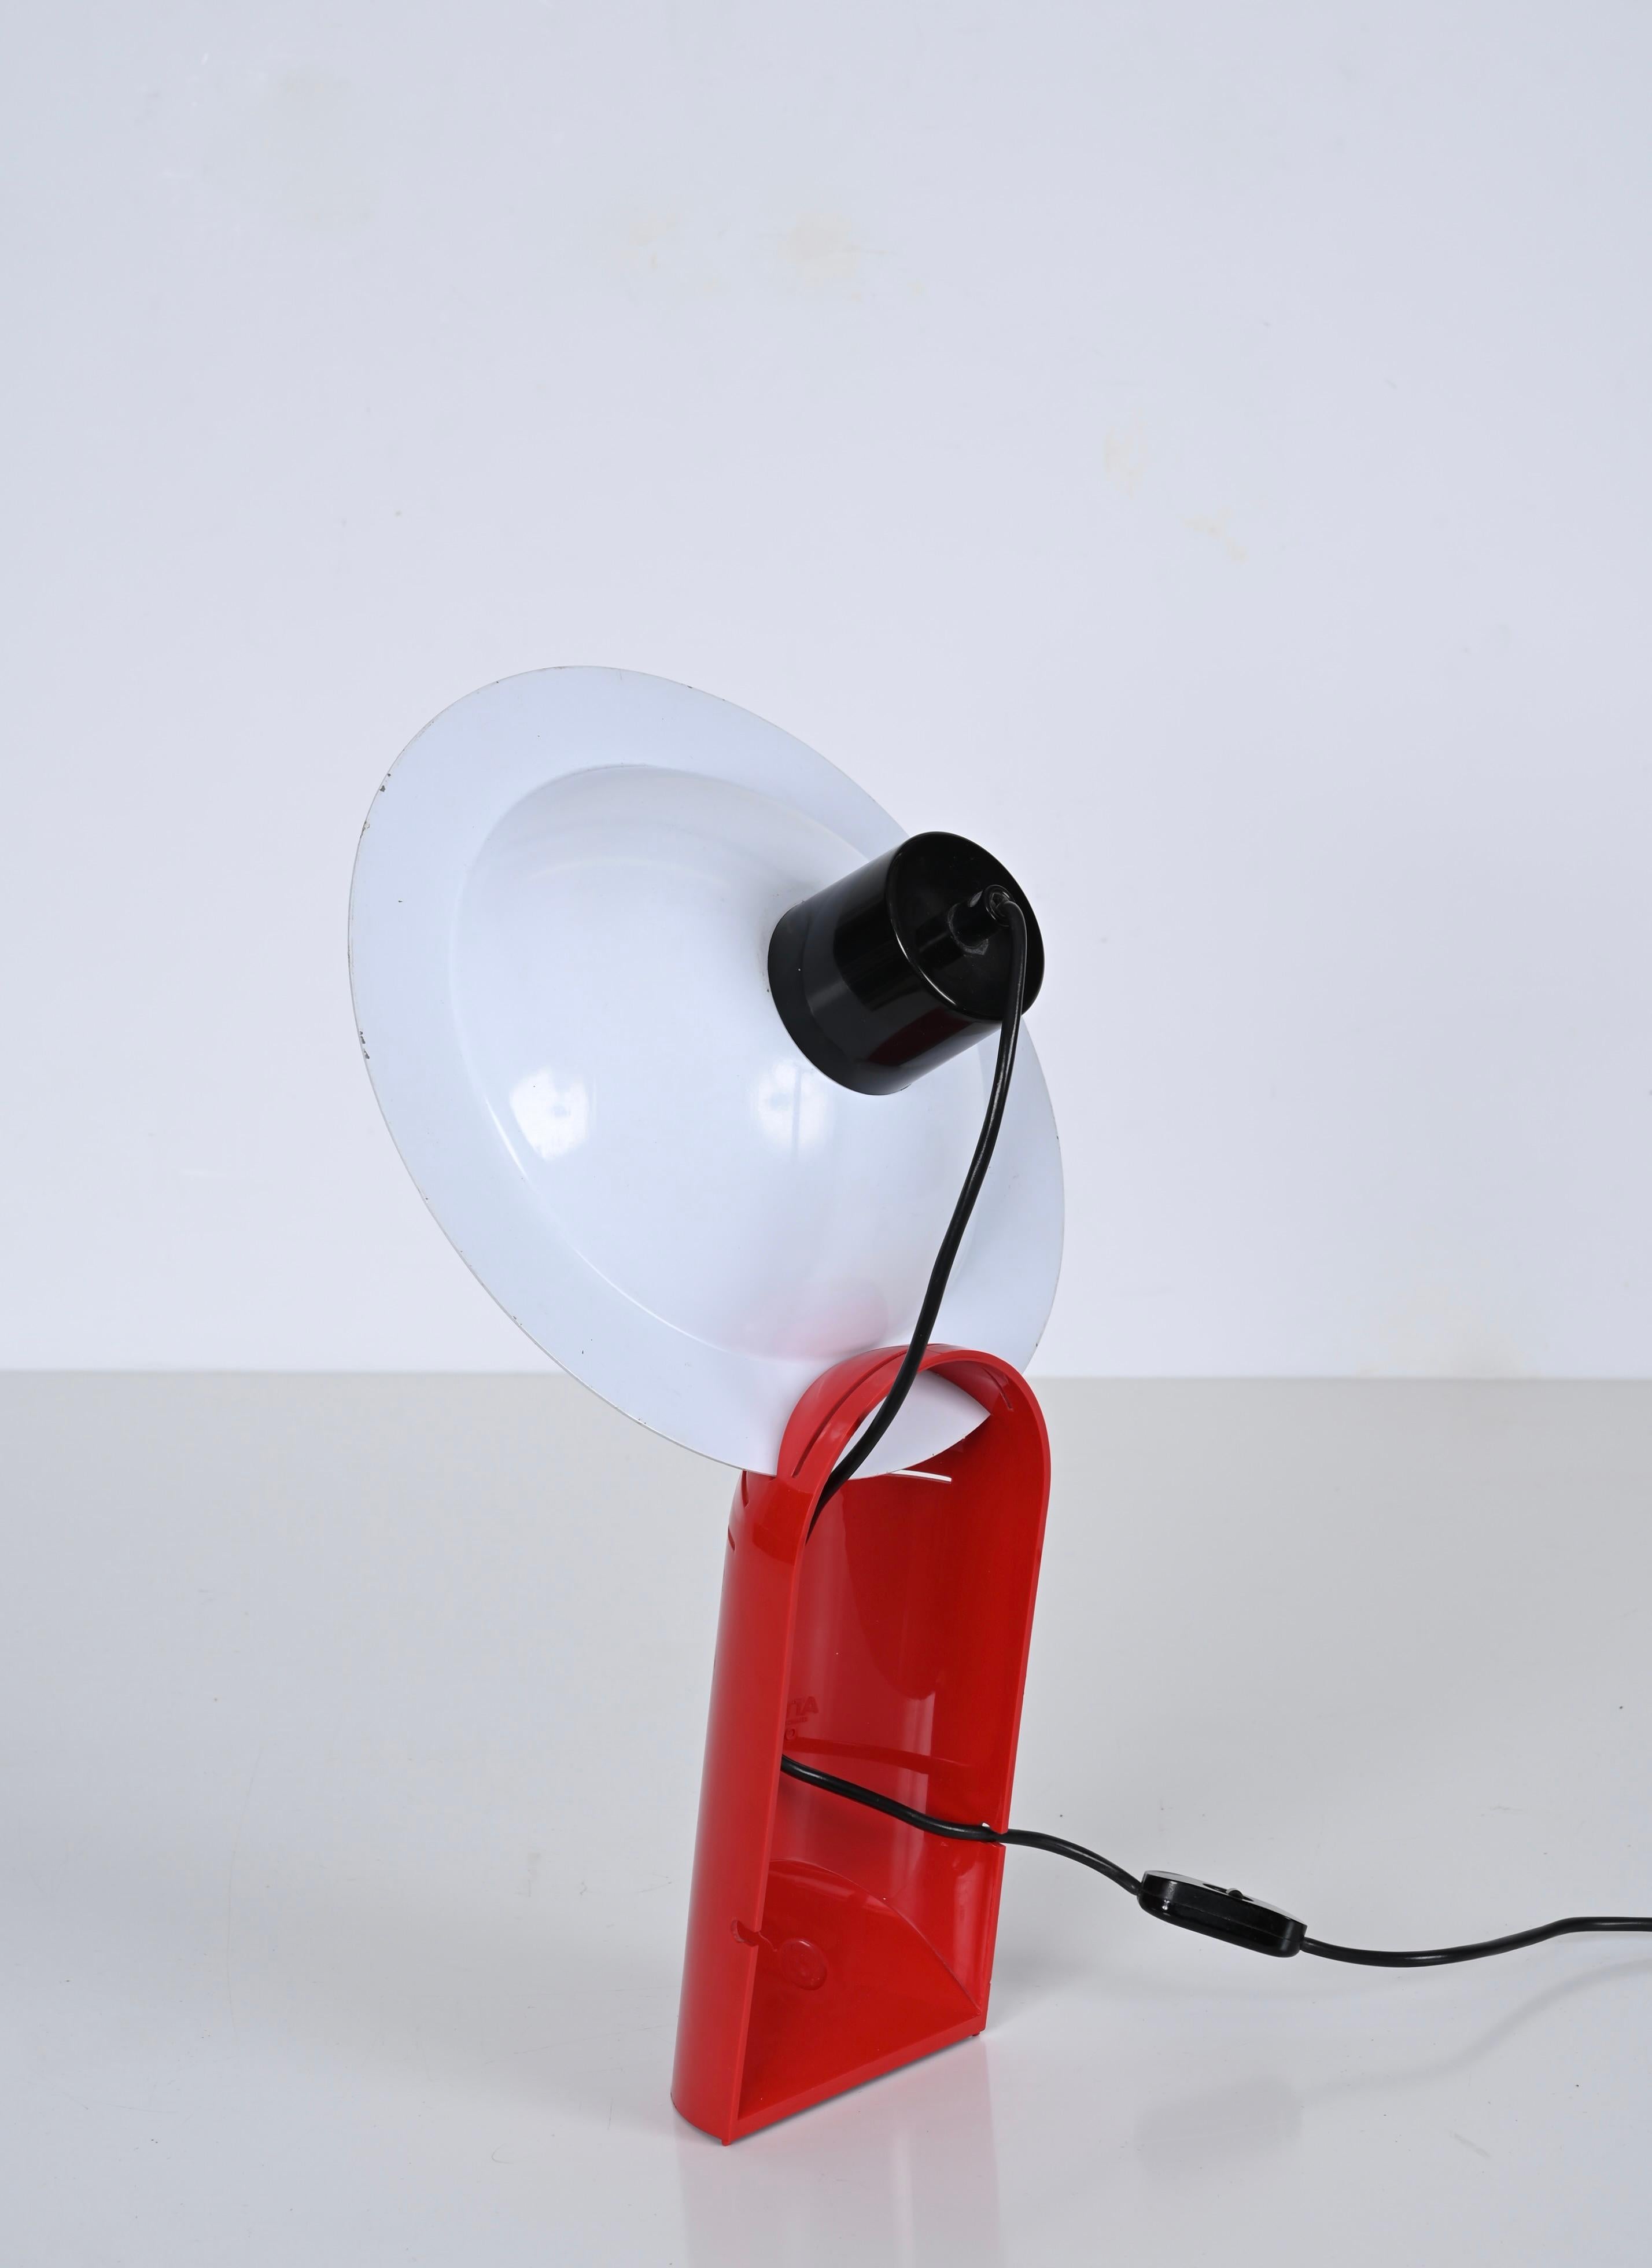 Vintage Lampiatta Table or Wall Lamp by De Pas for Stilnovo, Italy 1970s For Sale 10